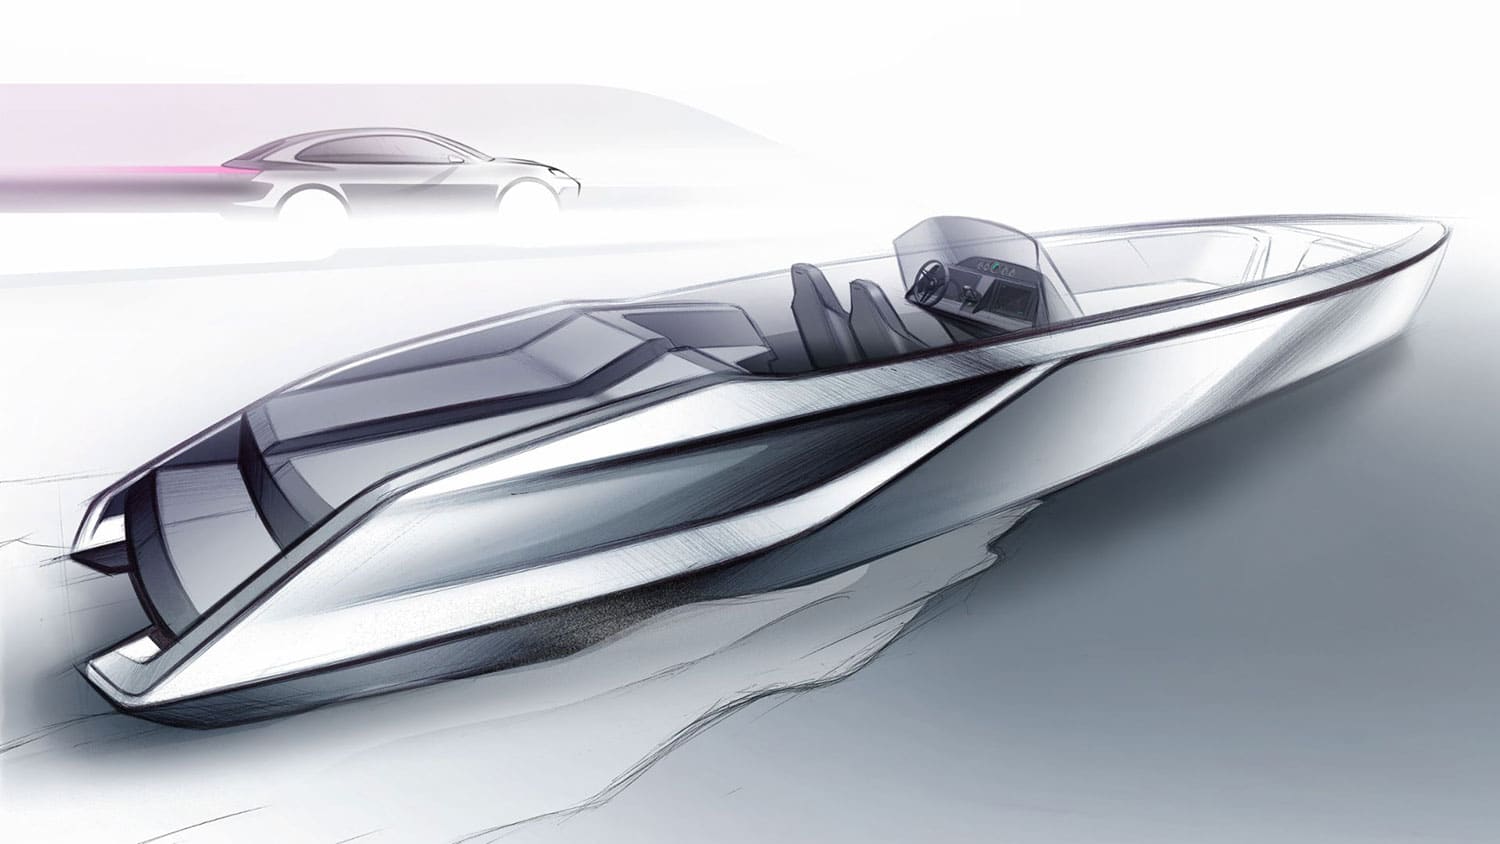 Concept art of the new electric sports boat.